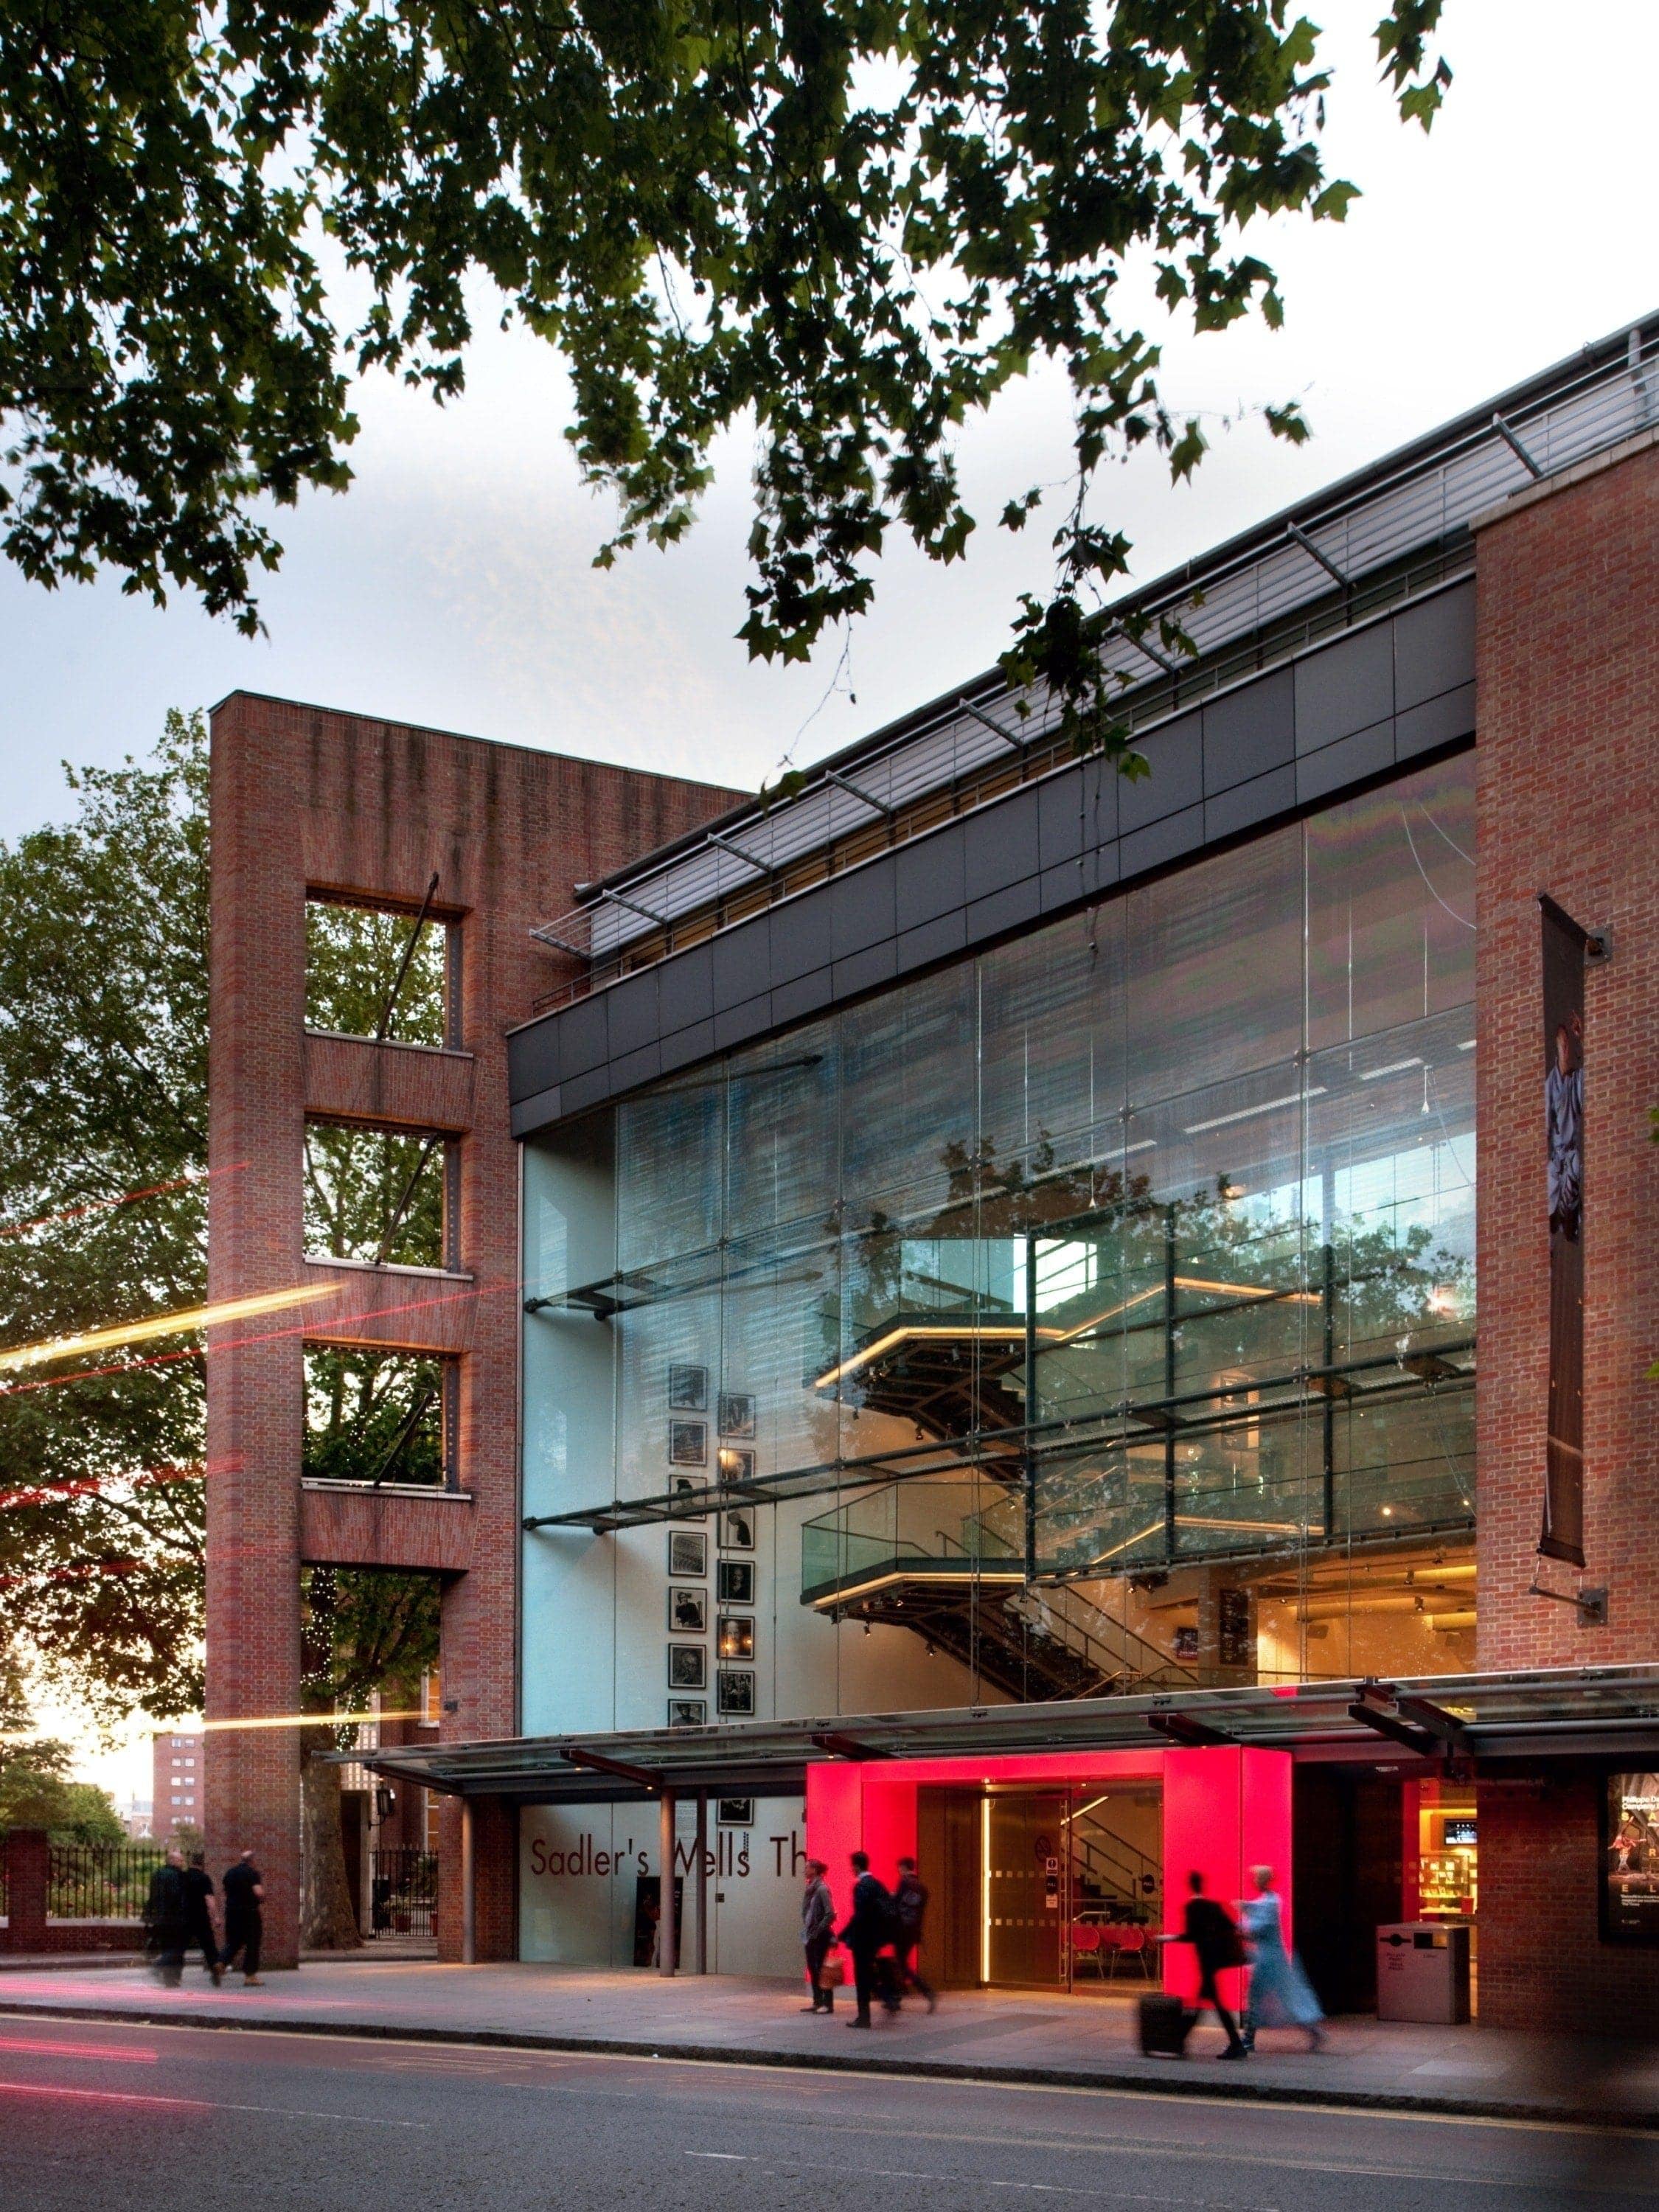 Exterior view of the building of Sadler’s Wells